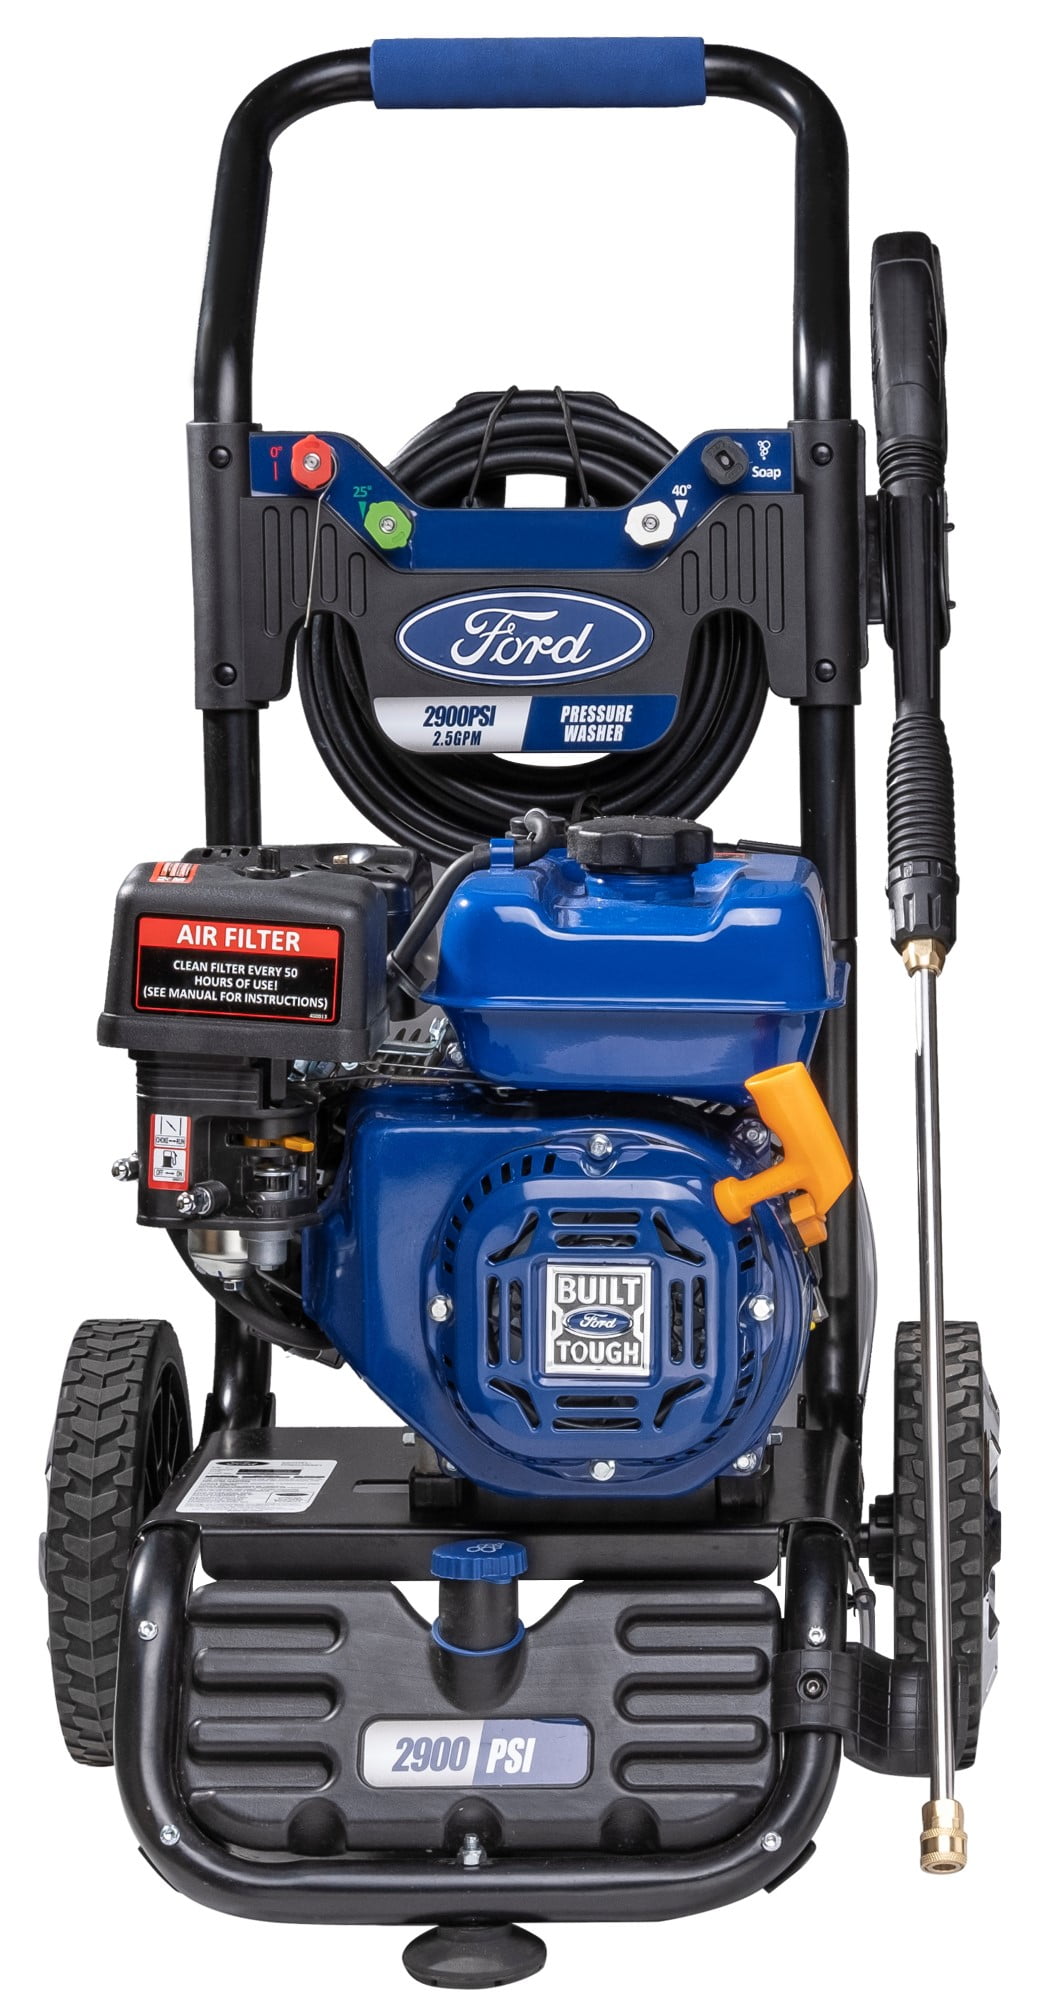 Ford FPWG2900H Gas Powered Pressure Washer - 2900 PSI and 2.5 GPM - CARB Compliant - 2